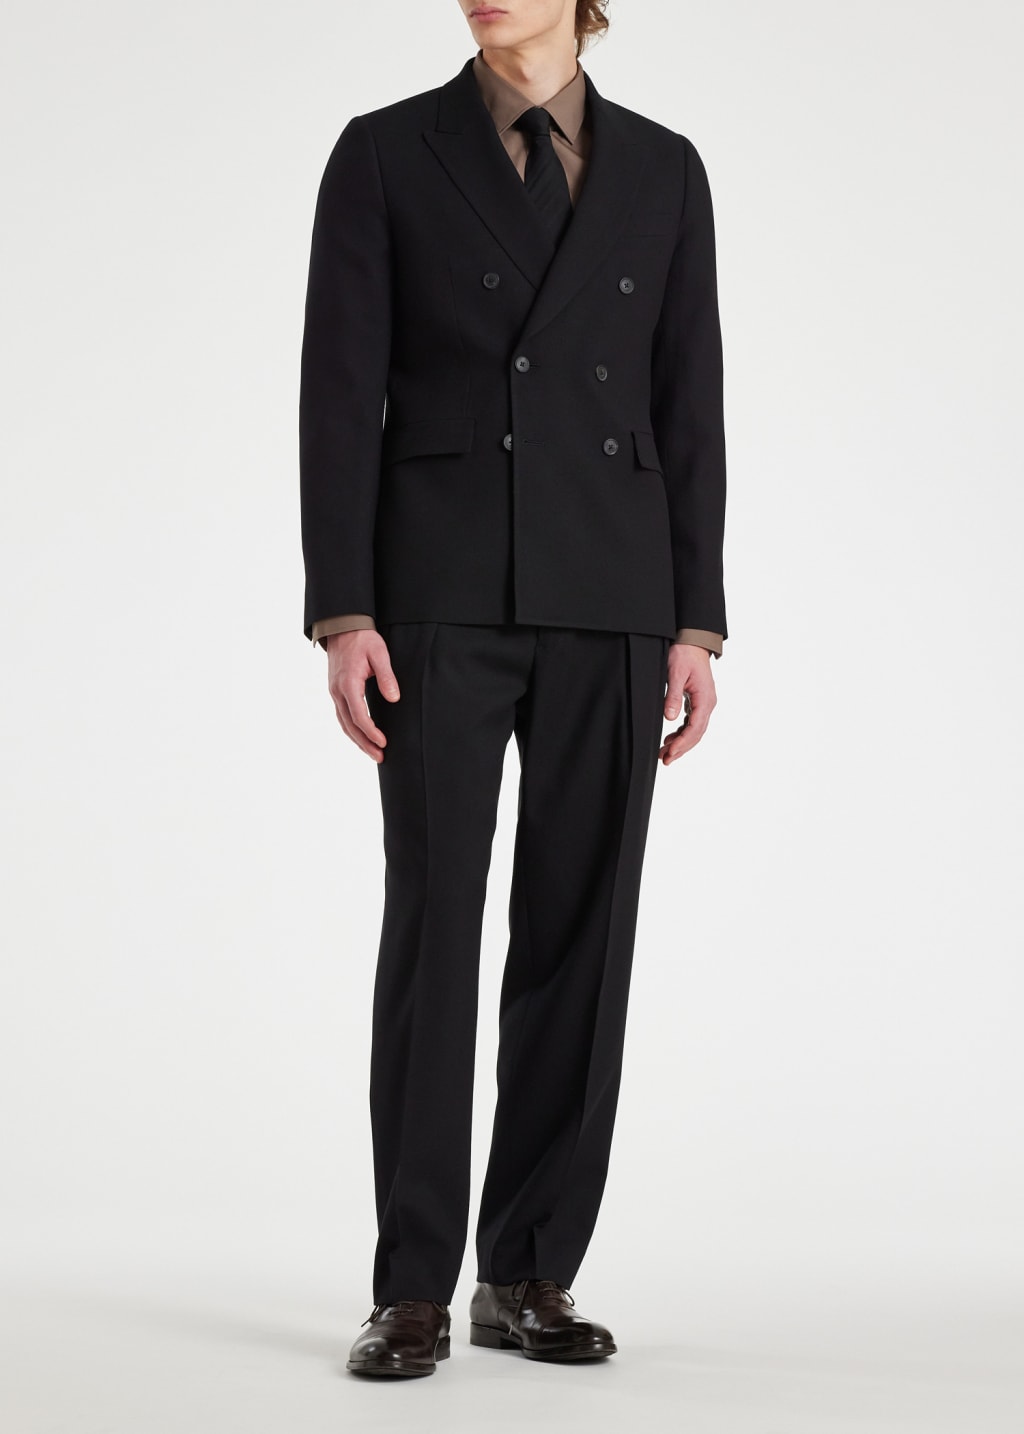 Model View -Men's Black Wool Double-Breasted Suit by Paul Smith